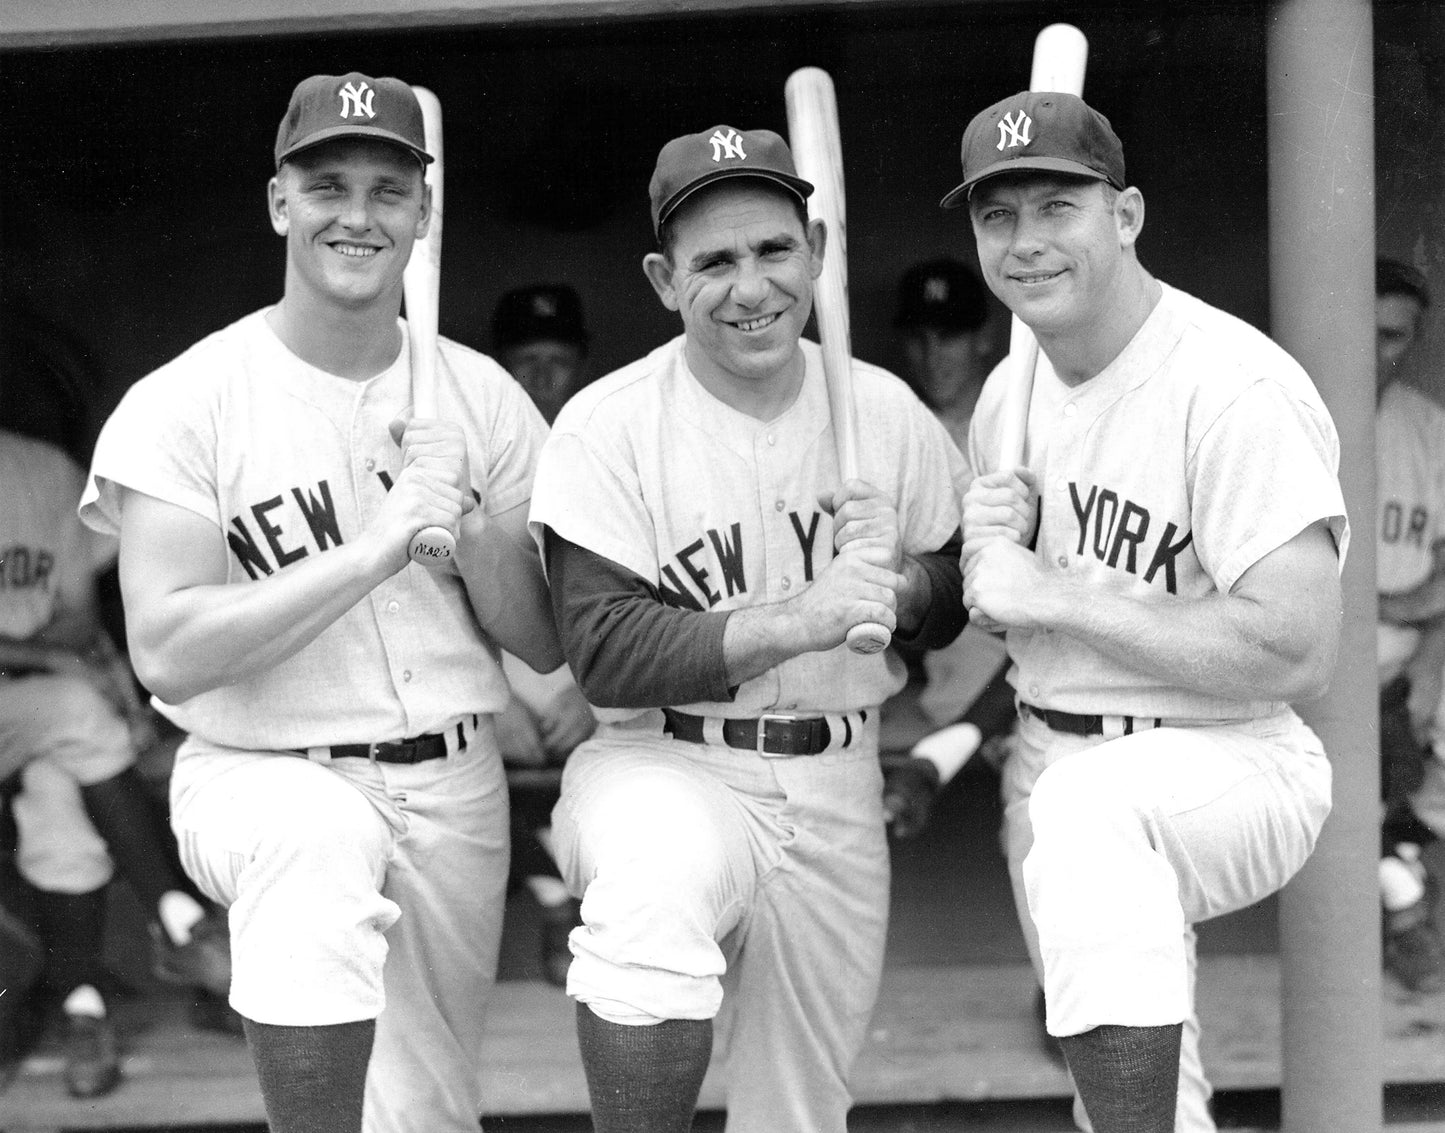 Roger Maris, Yogi Berra, And Mickey Mantle together in 1961.